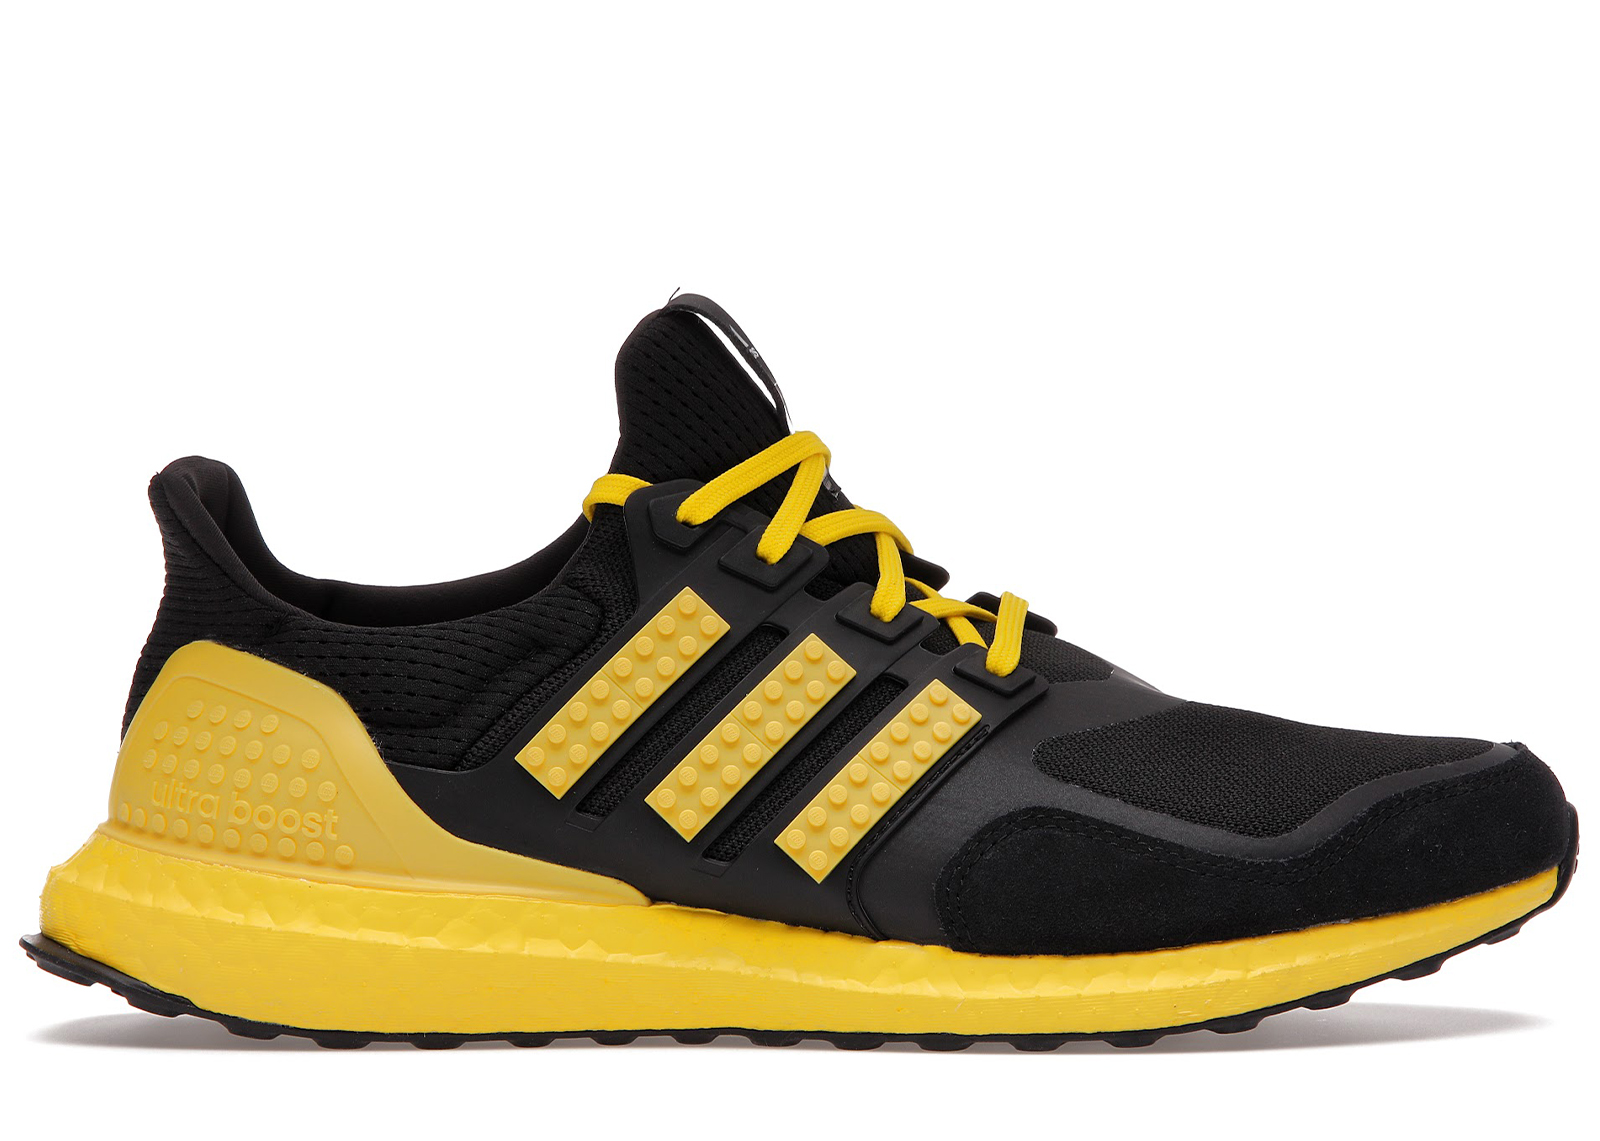 adidas ZX 8000 LEGO Color Pack Yellow Men's - FY7081 - US